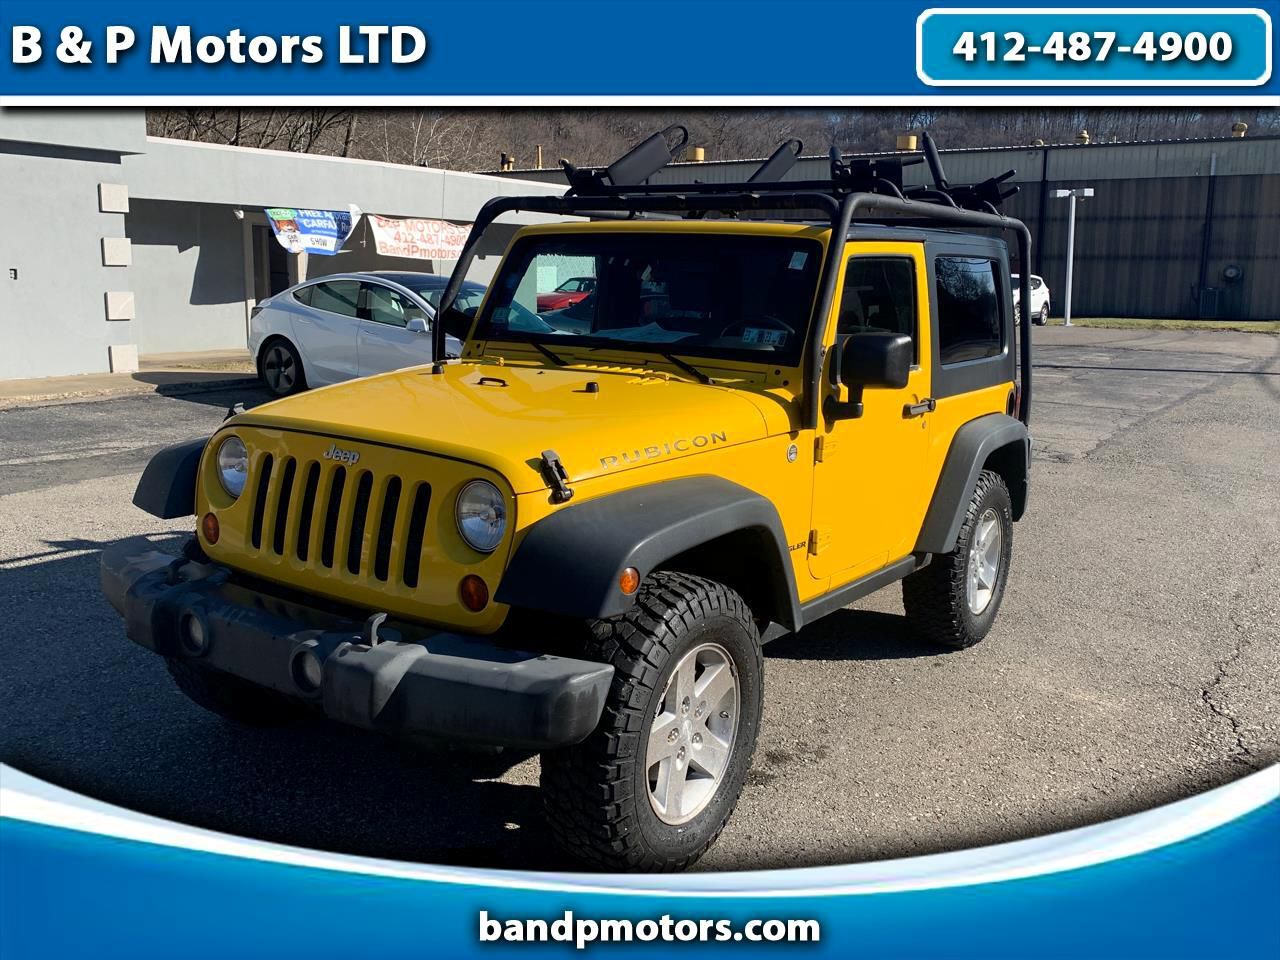 2009 Jeep Wrangler for Sale in Glenshaw, PA - OfferUp